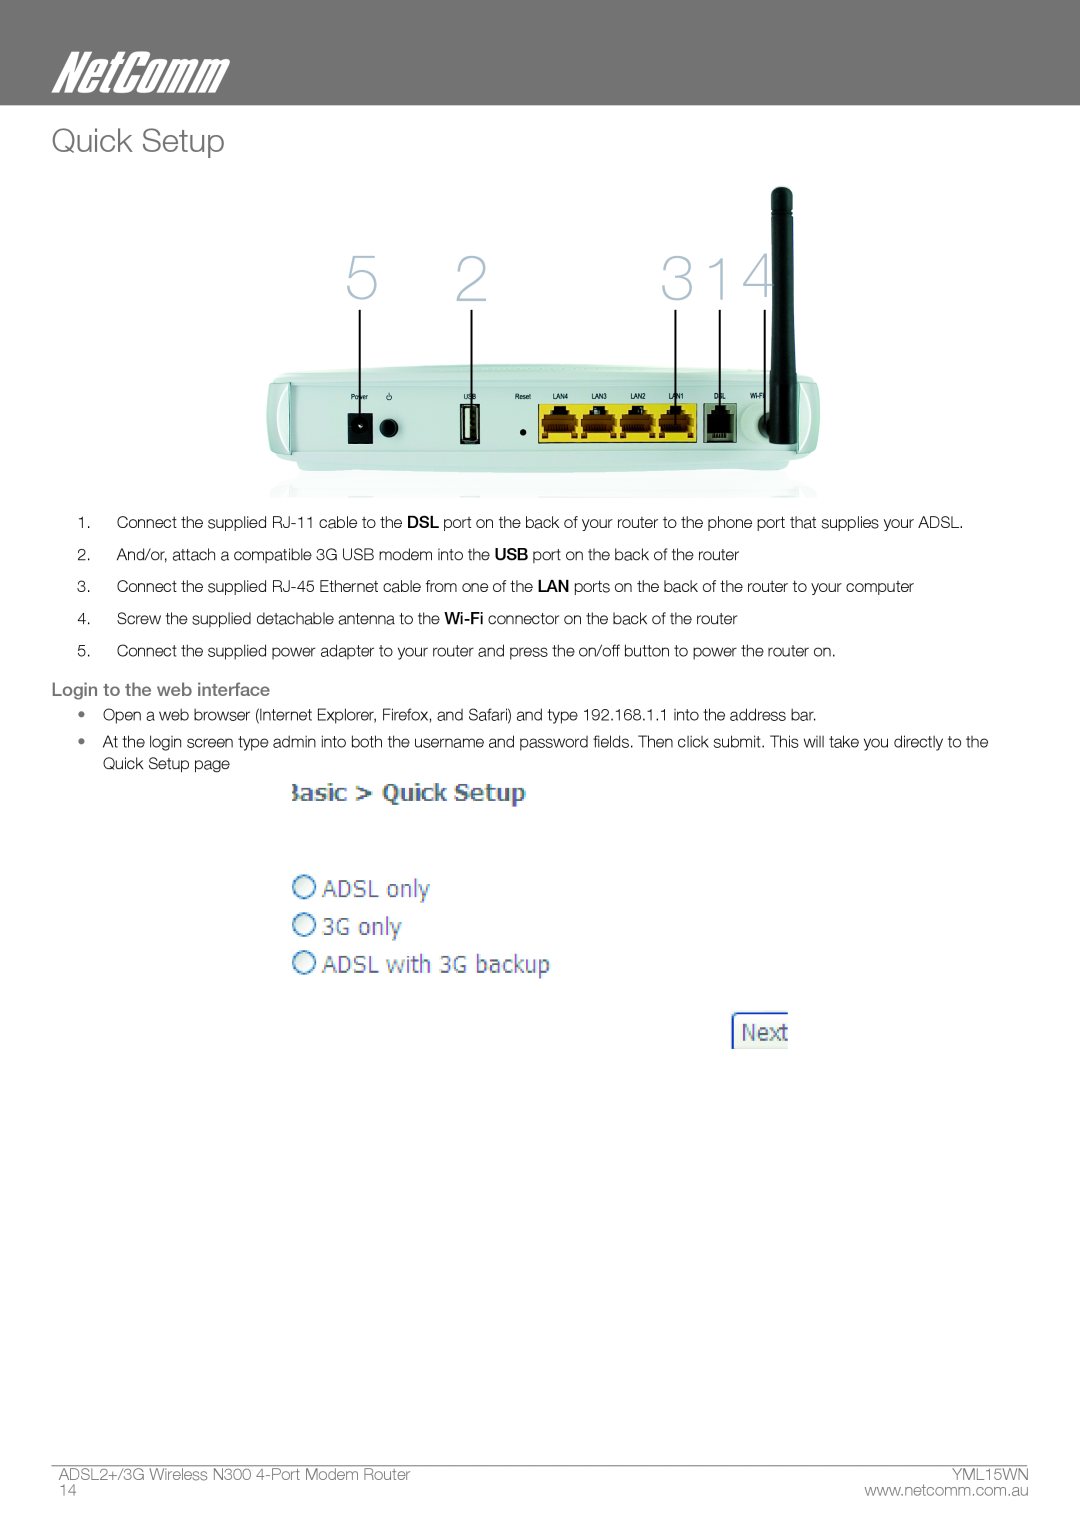 Nortel Networks manual Quick Setup, Login to the web interface, ADSL2+/3G Wireless N300 4-Port Modem Router, ymL15WN 